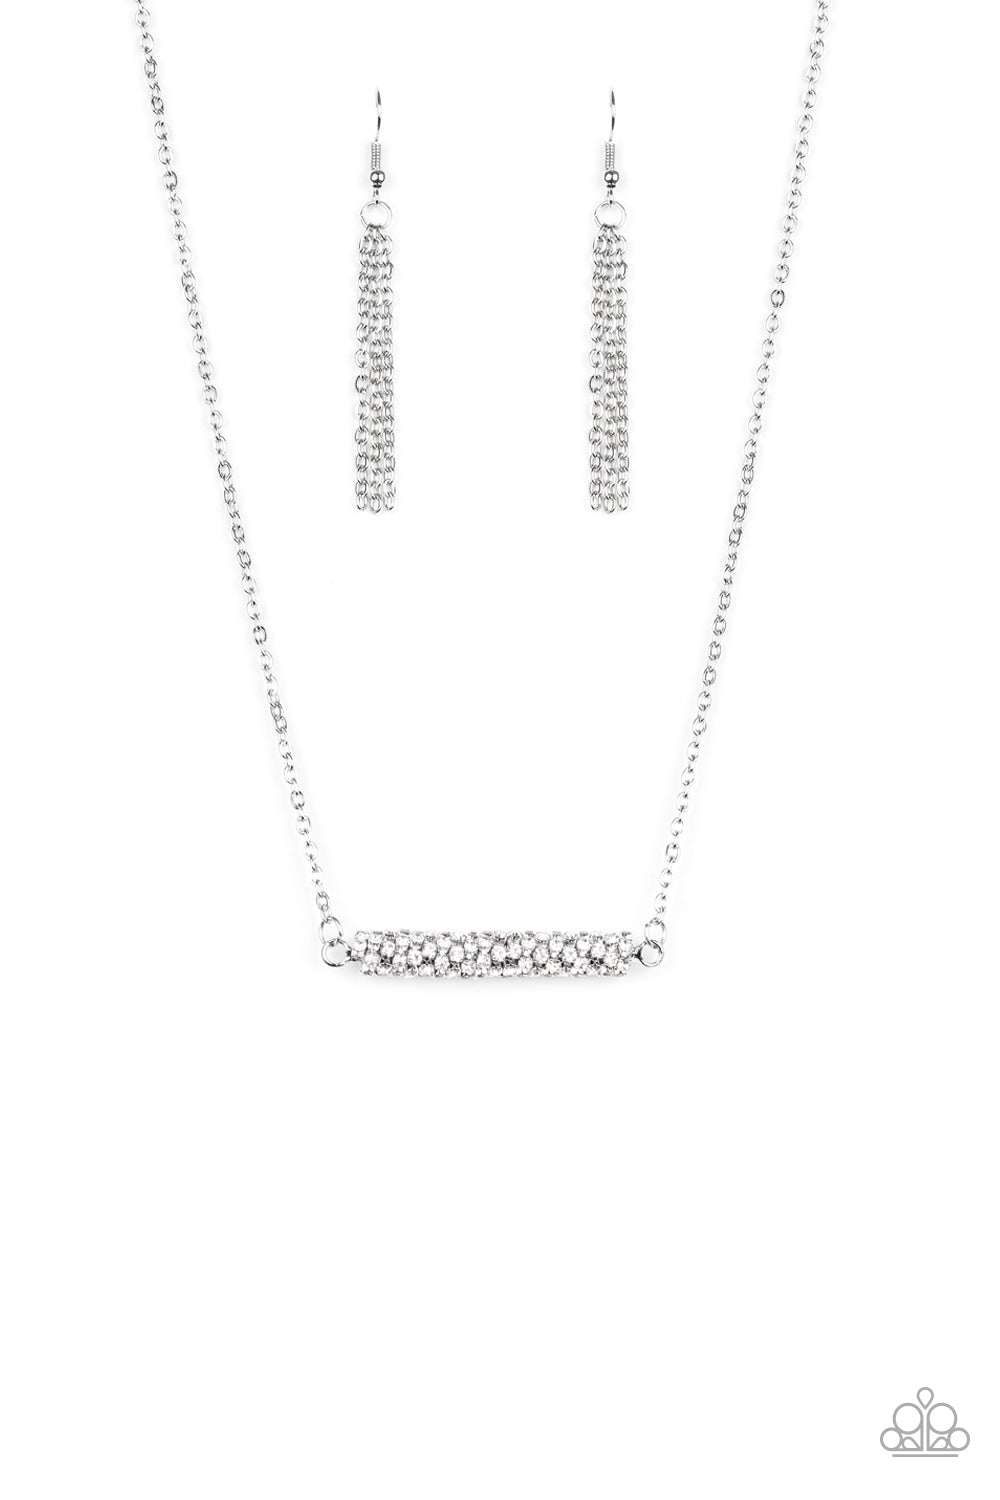 As if rolled in glitter, a chain of glassy white rhinestones spins tightly into a rounded silver pendant that is suspended horizontally below the collar for a refined flair. Features an adjustable clasp closure.